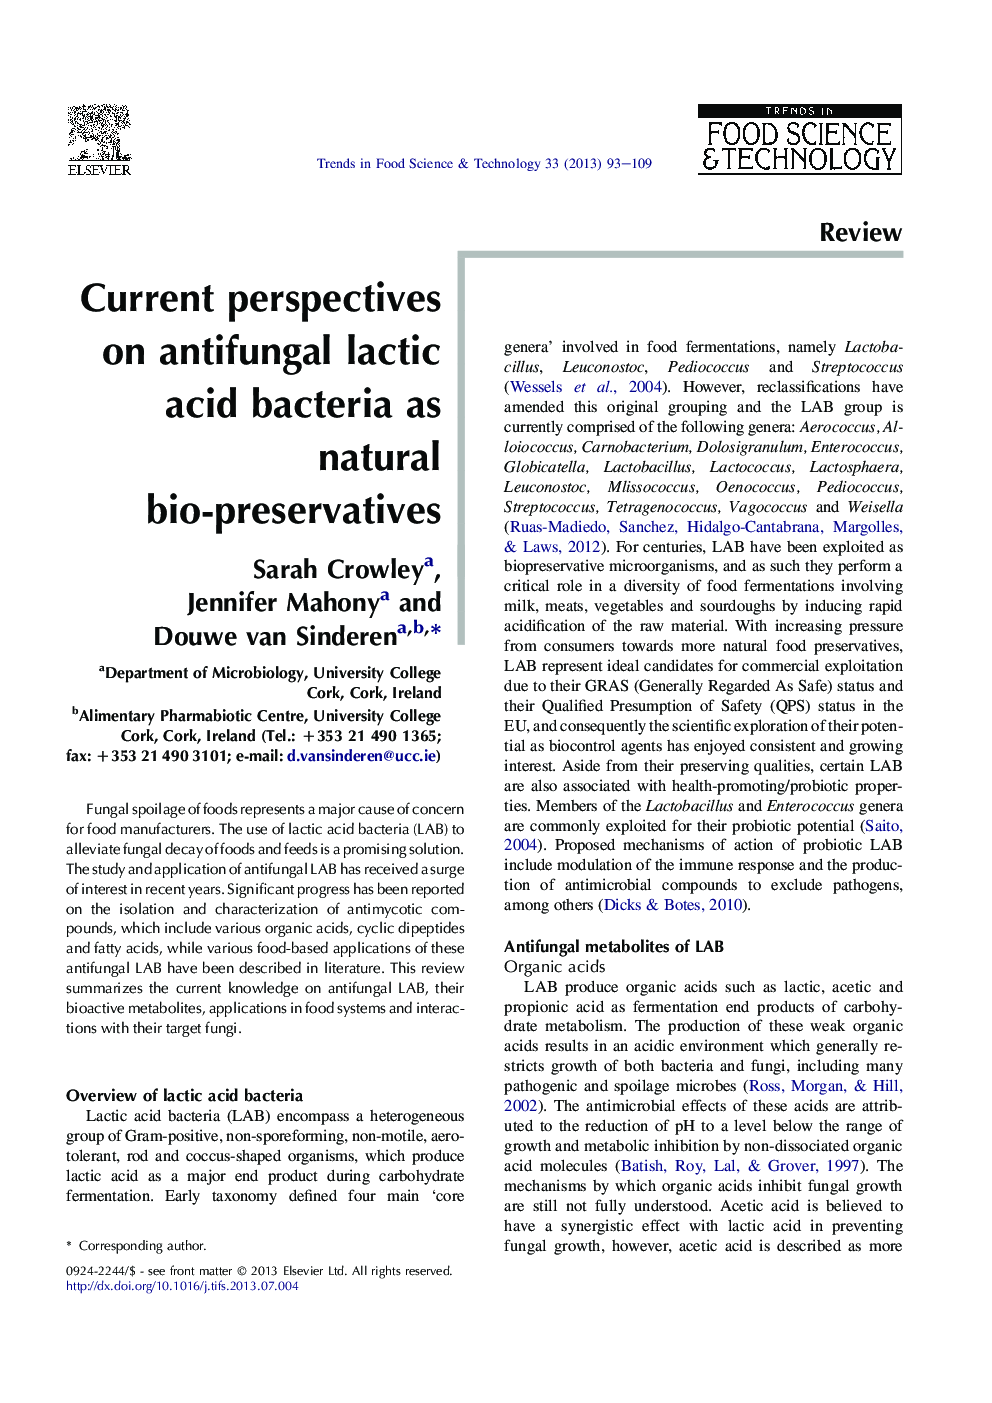 Current perspectives on antifungal lactic acid bacteria as natural bio-preservatives